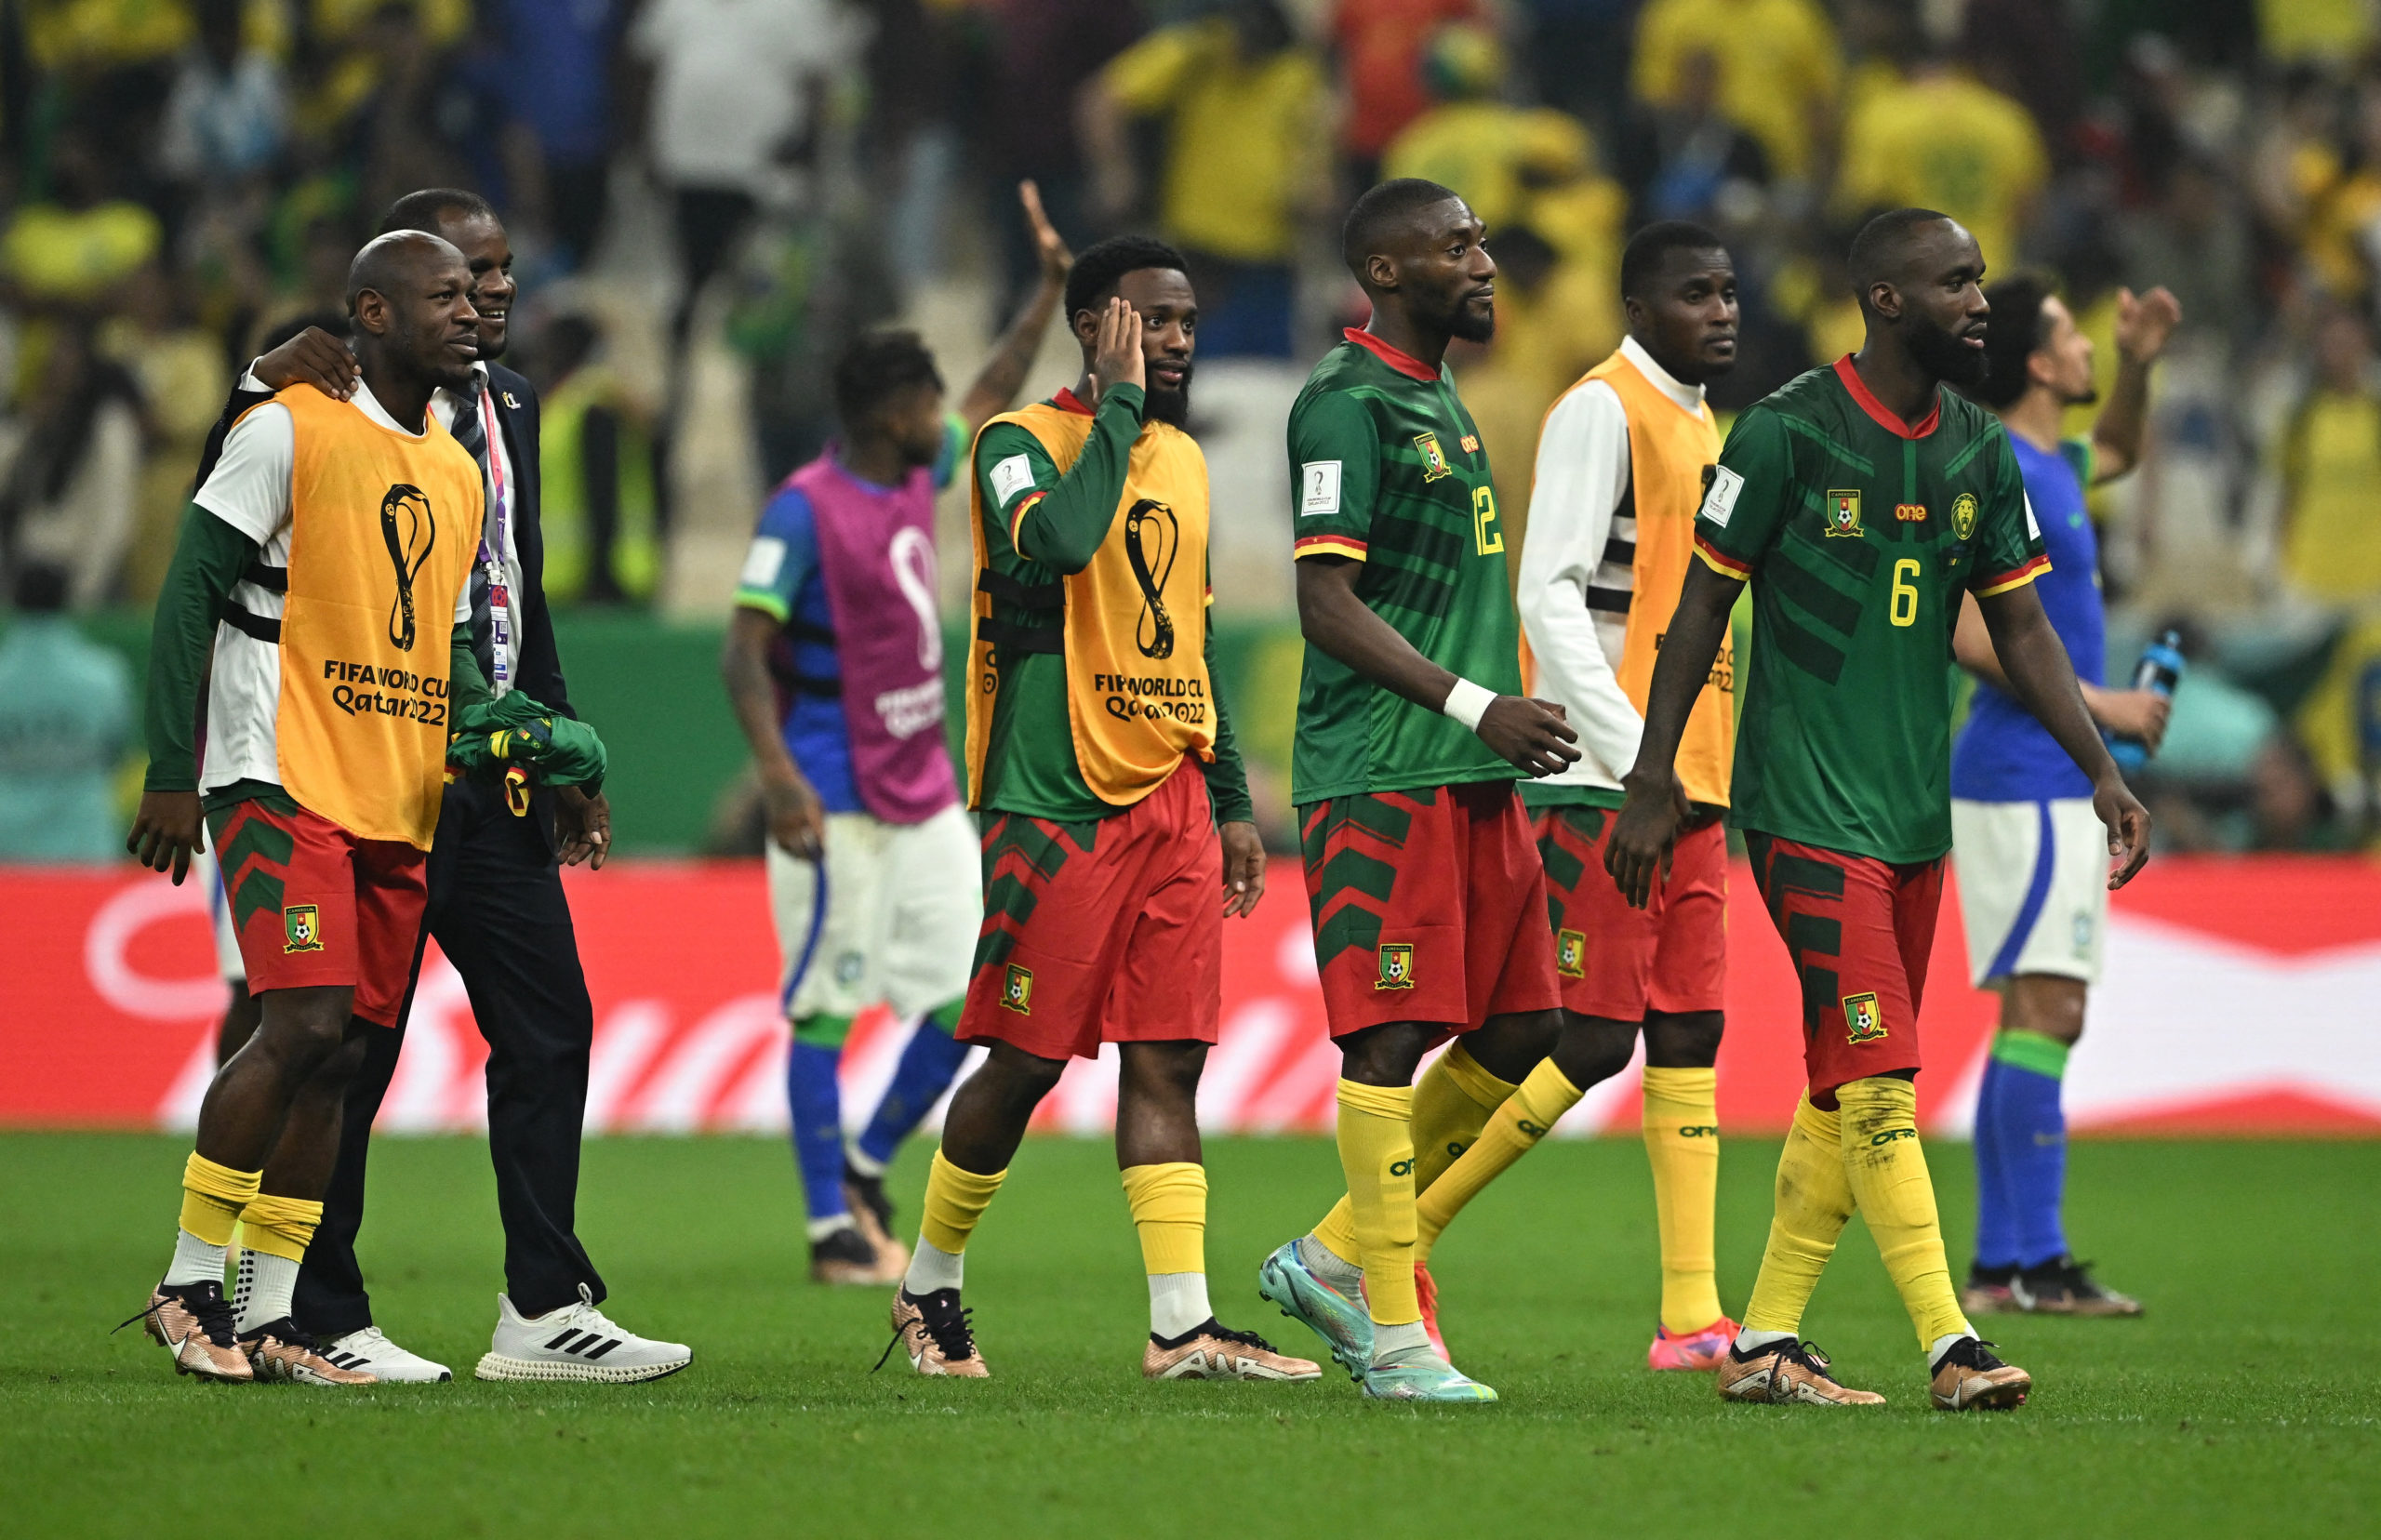 Soccer Football - FIFA World Cup Qatar 2022 - Group G - Cameroon v Brazil - Lusail Stadium, Lusail, Qatar - December 2, 2022 Cameroon's Nicolas Moumi Ngamaleu with teammates look dejected as Cameroon are eliminated from the World Cup 